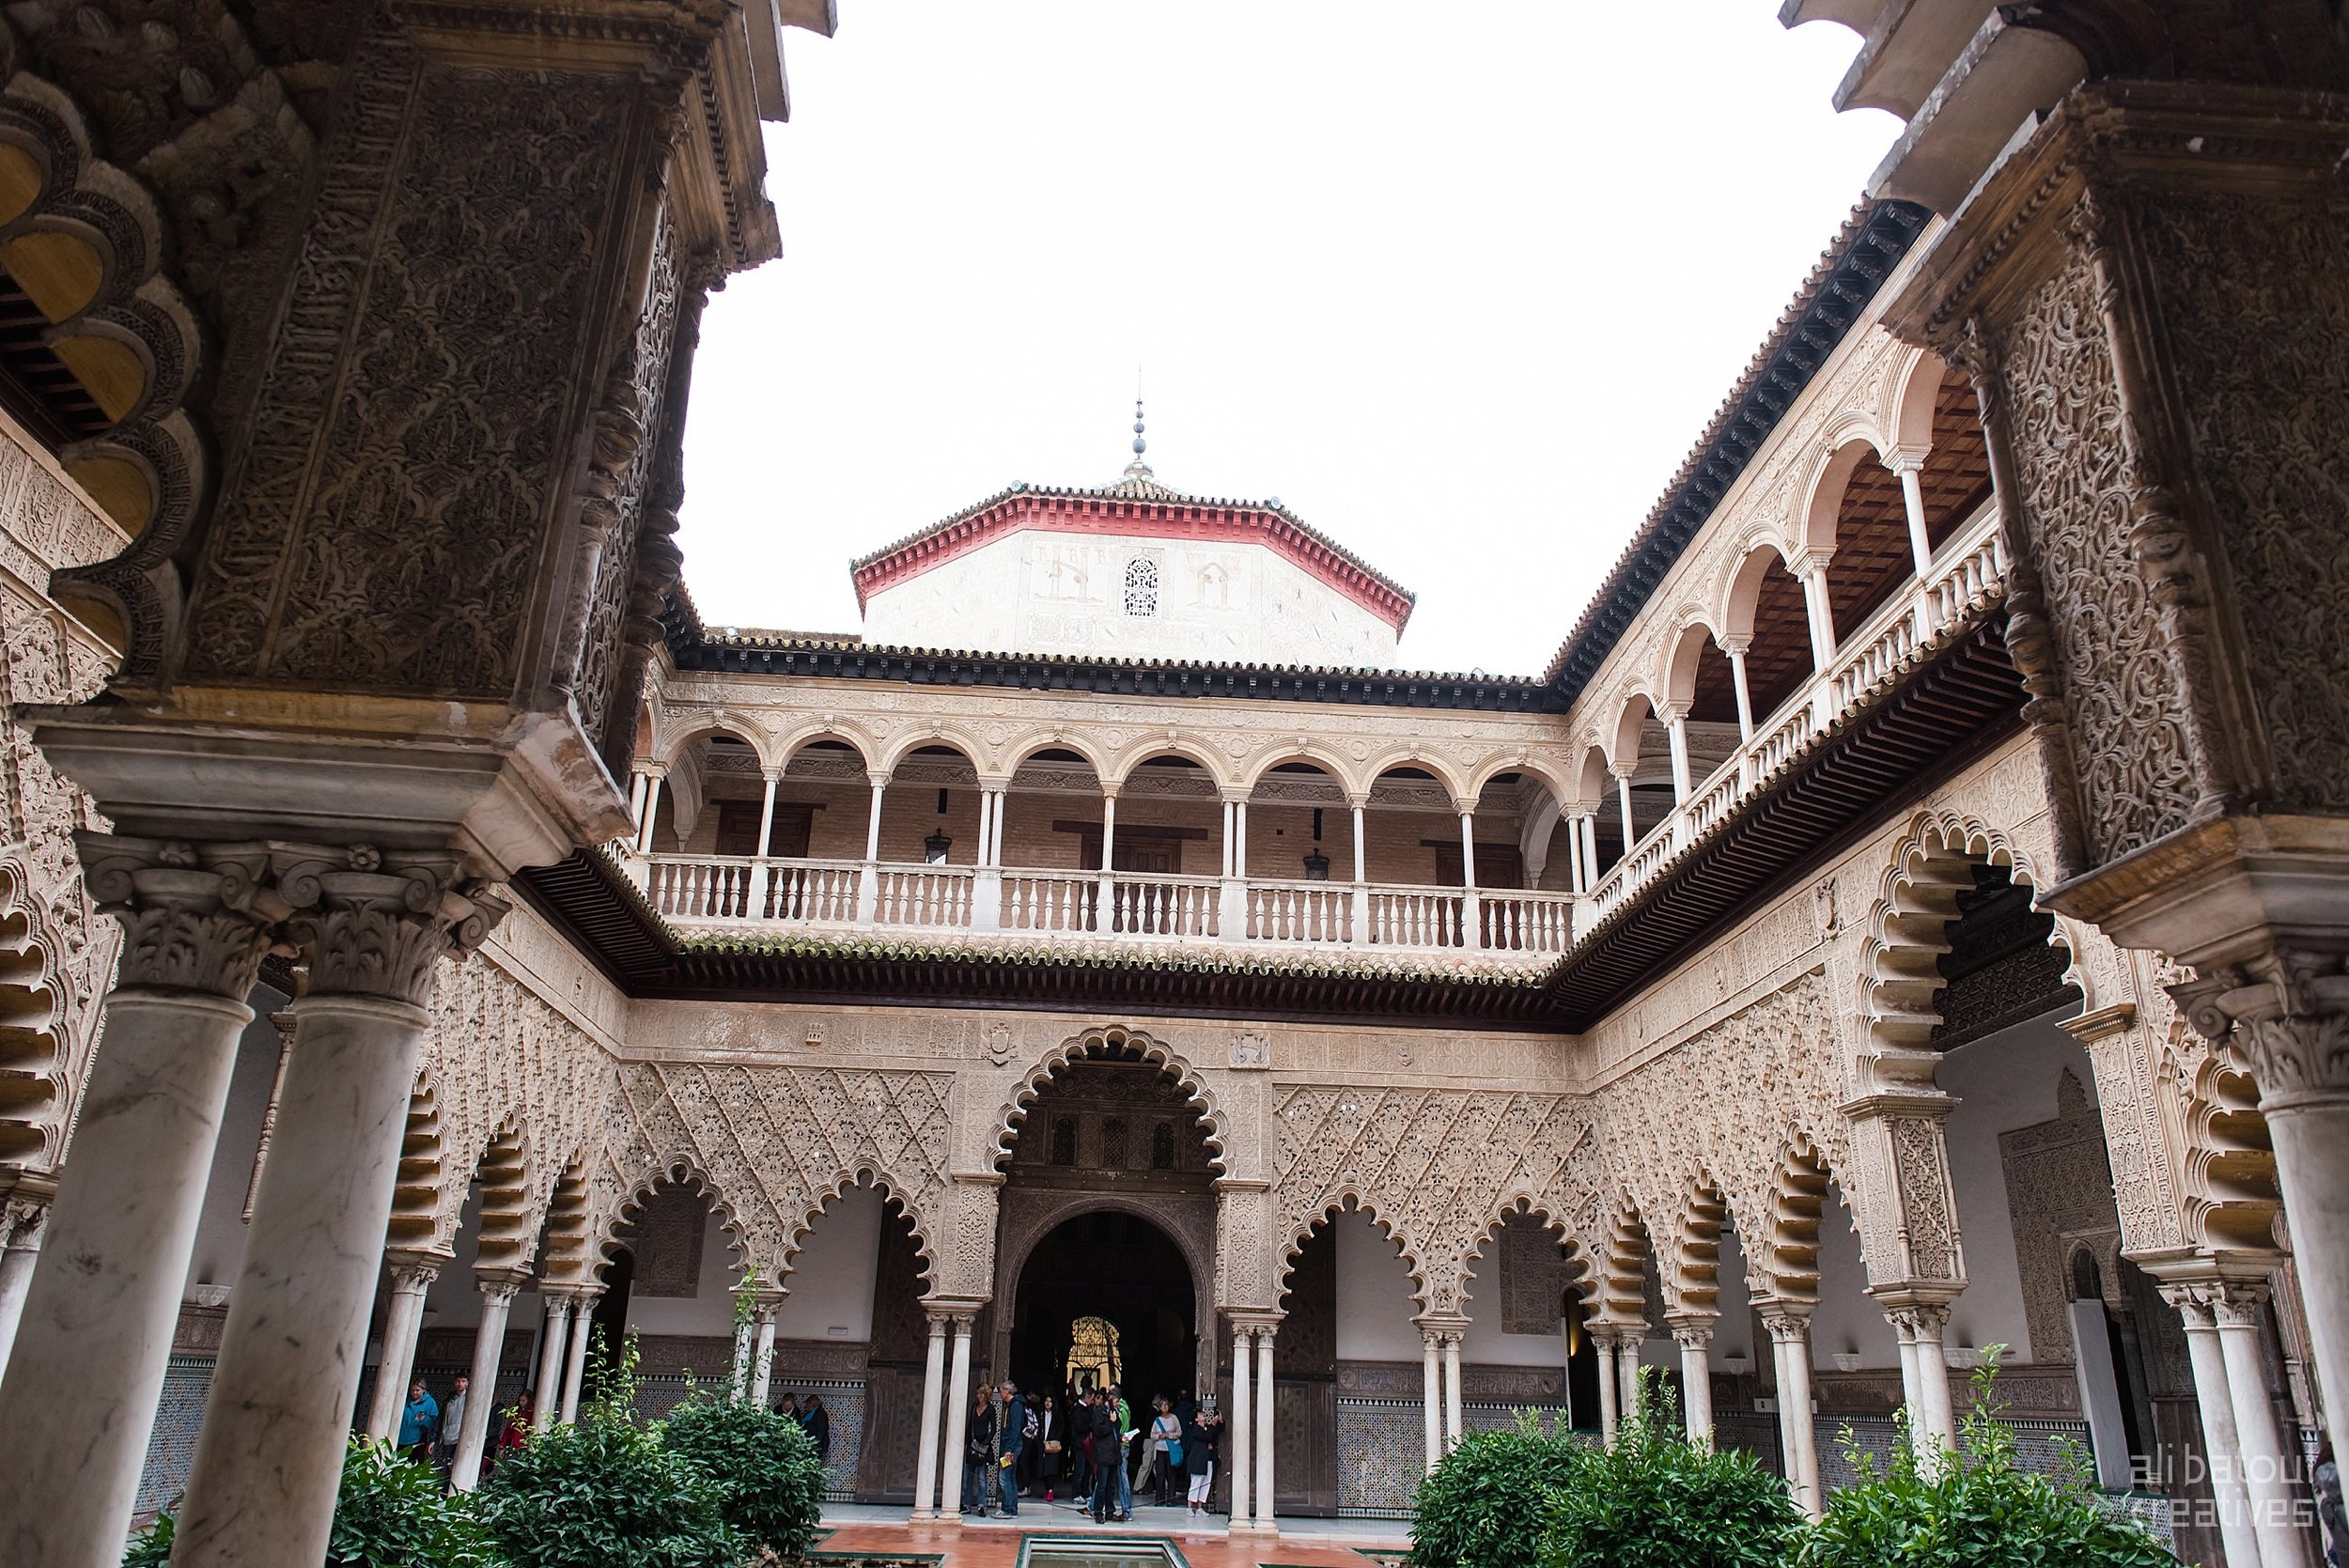  Day 2 of our Seville adventures began at the incredible Alcazar. 